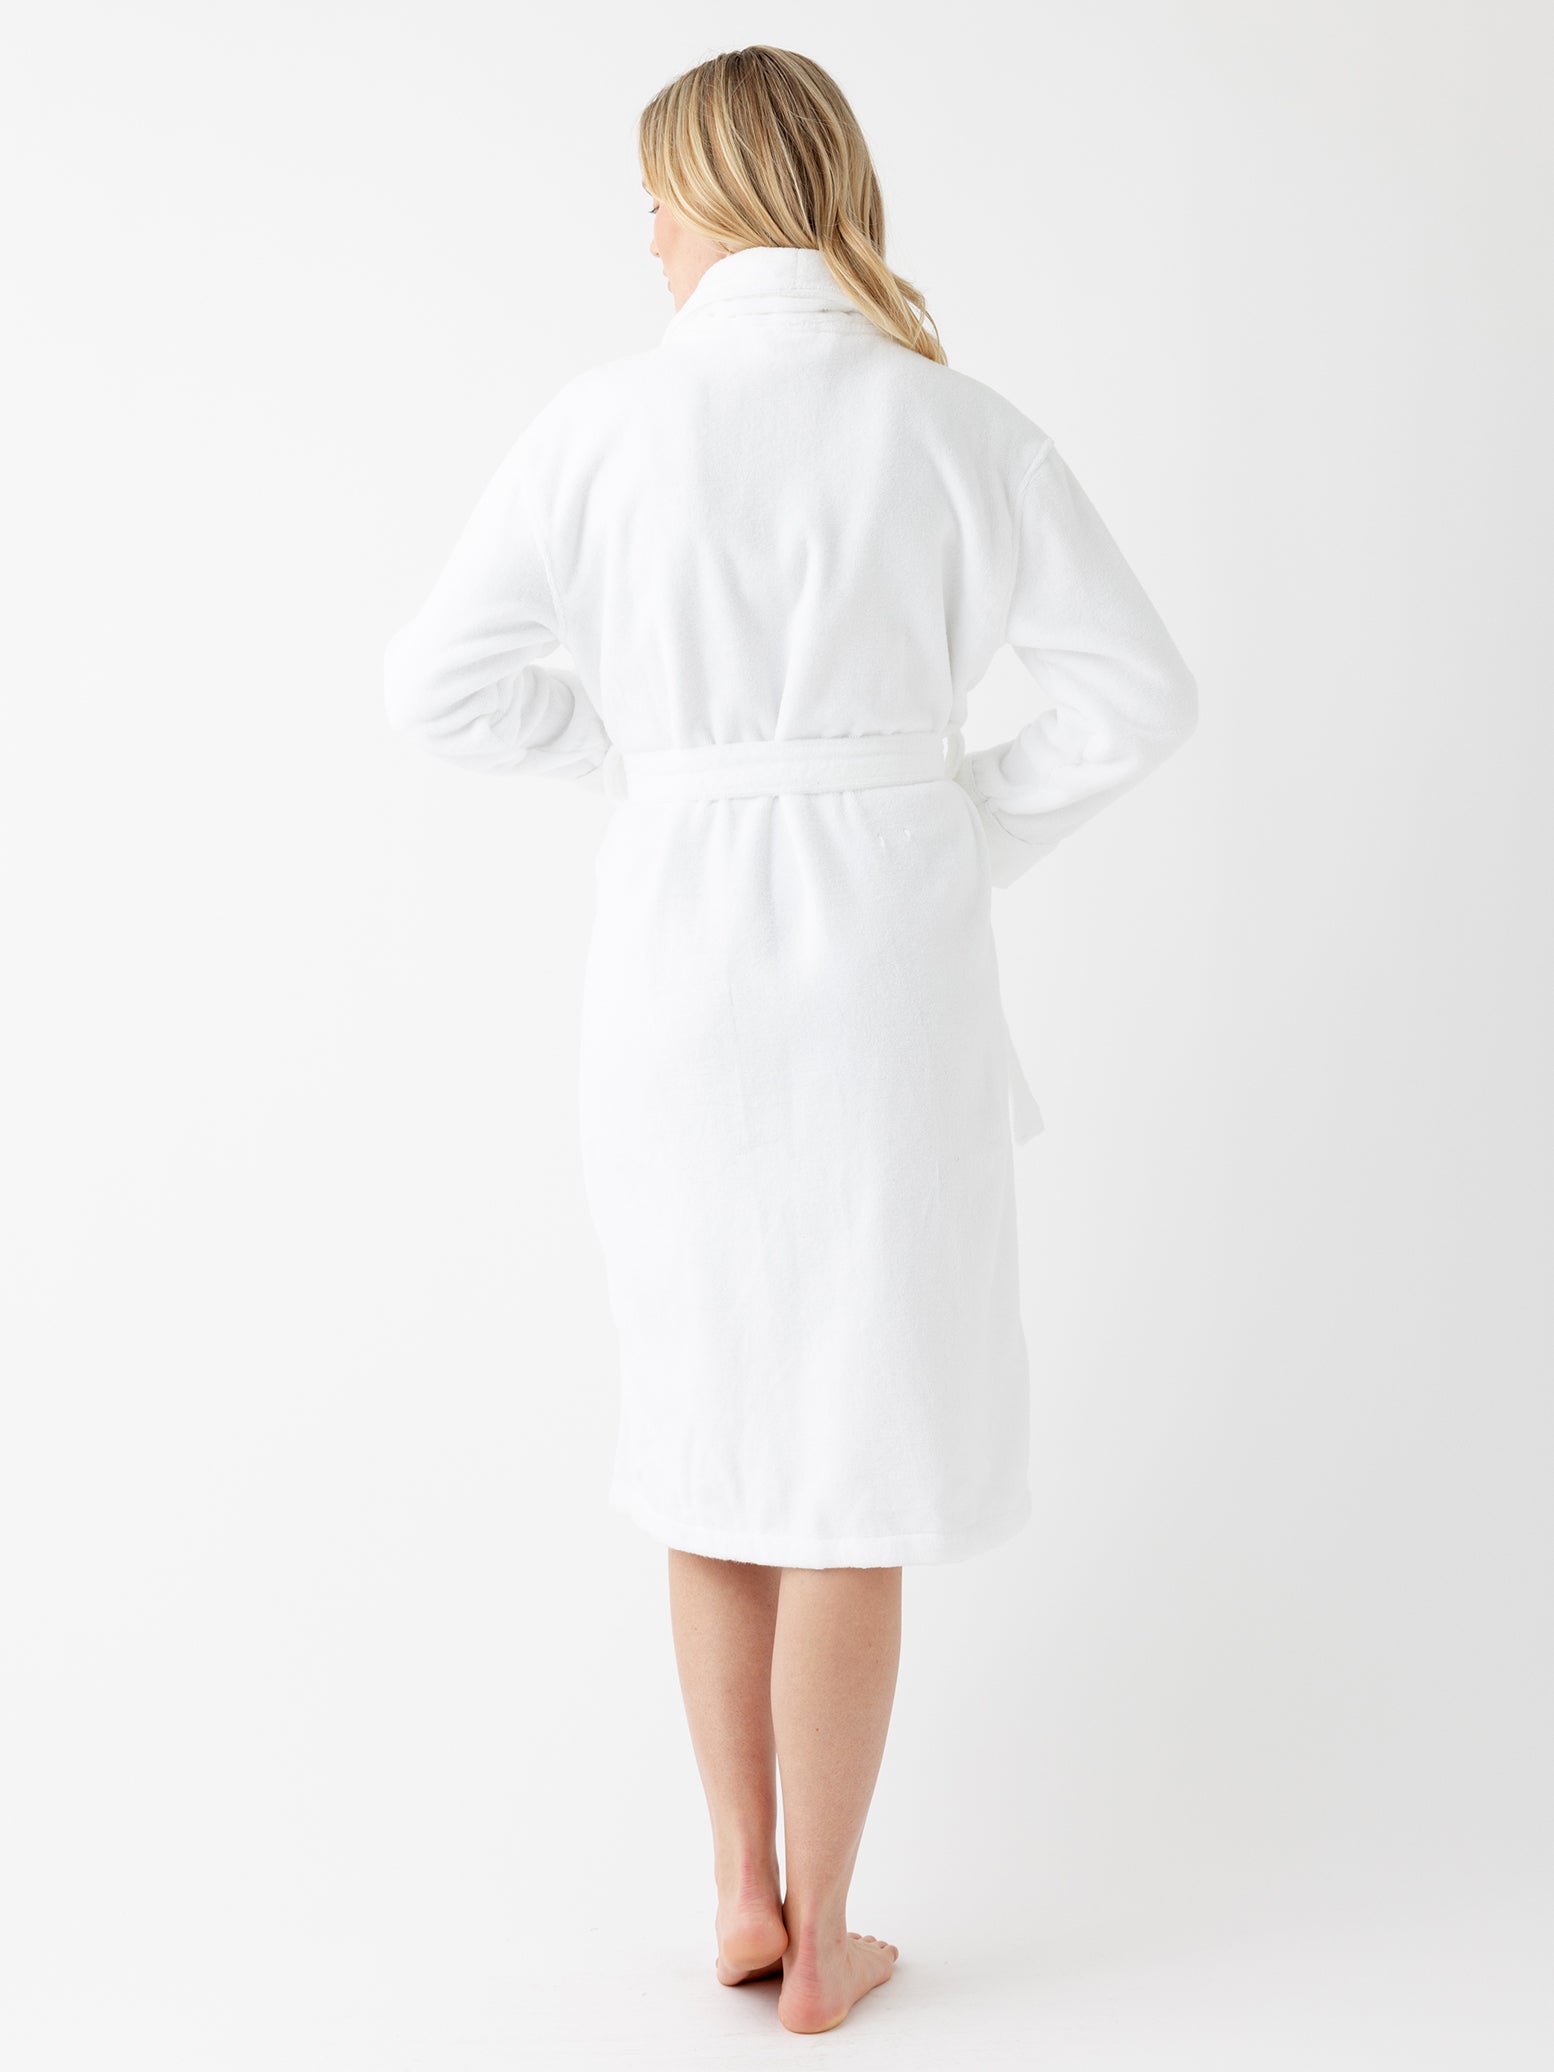 Back of woman with white bath robe 